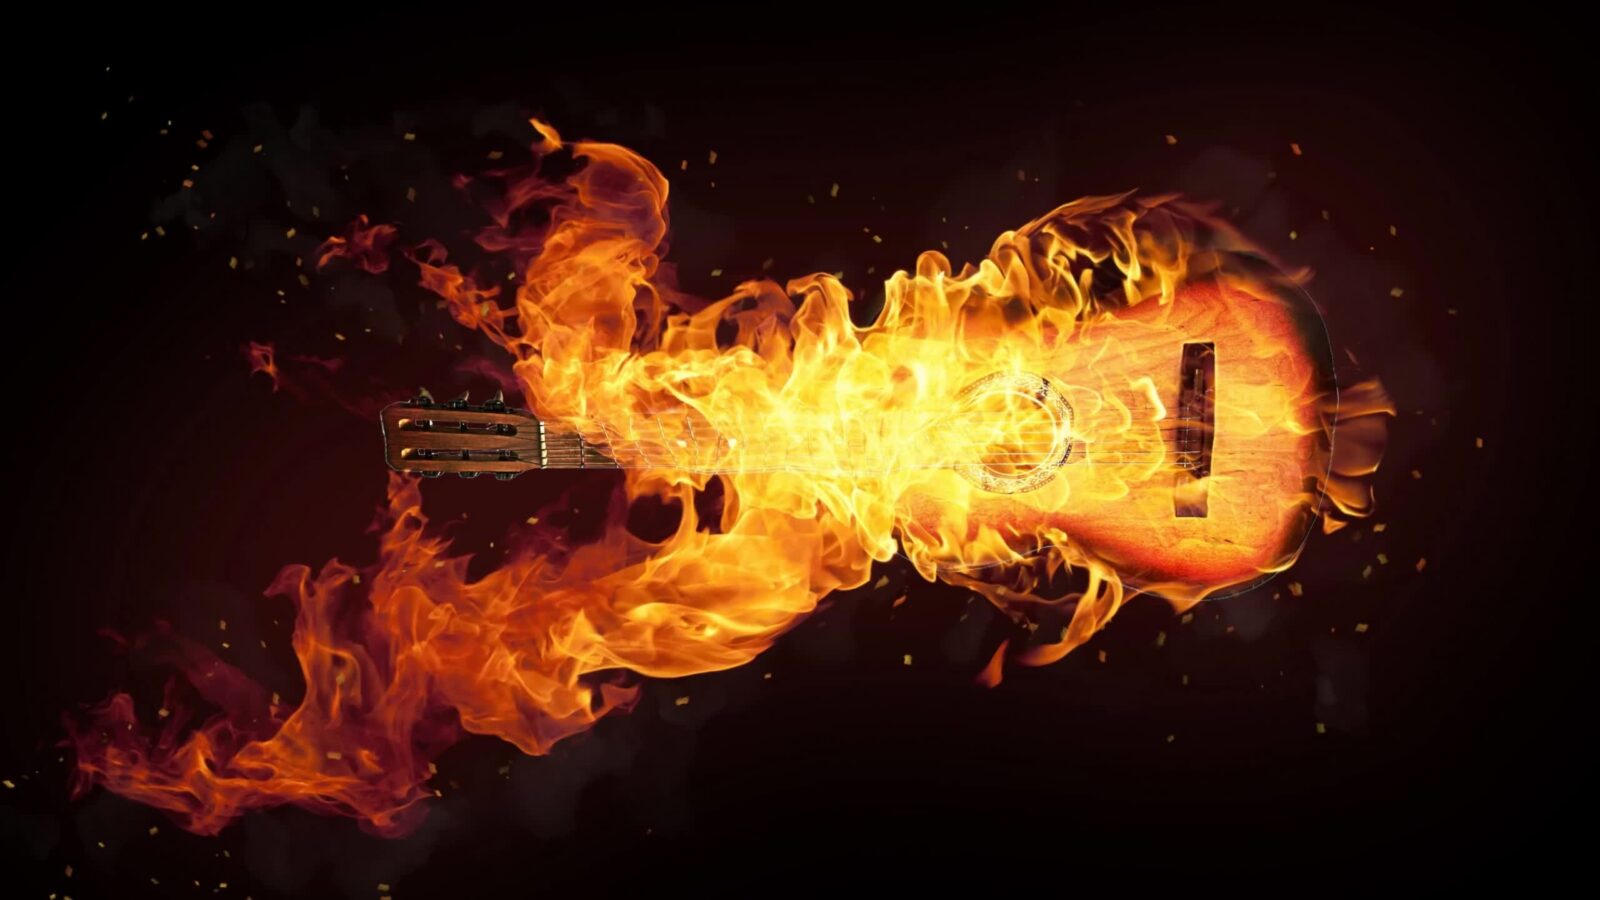 Flame Guitar Fantasy Abstract 2K Quality – Animated Live Wallpaper